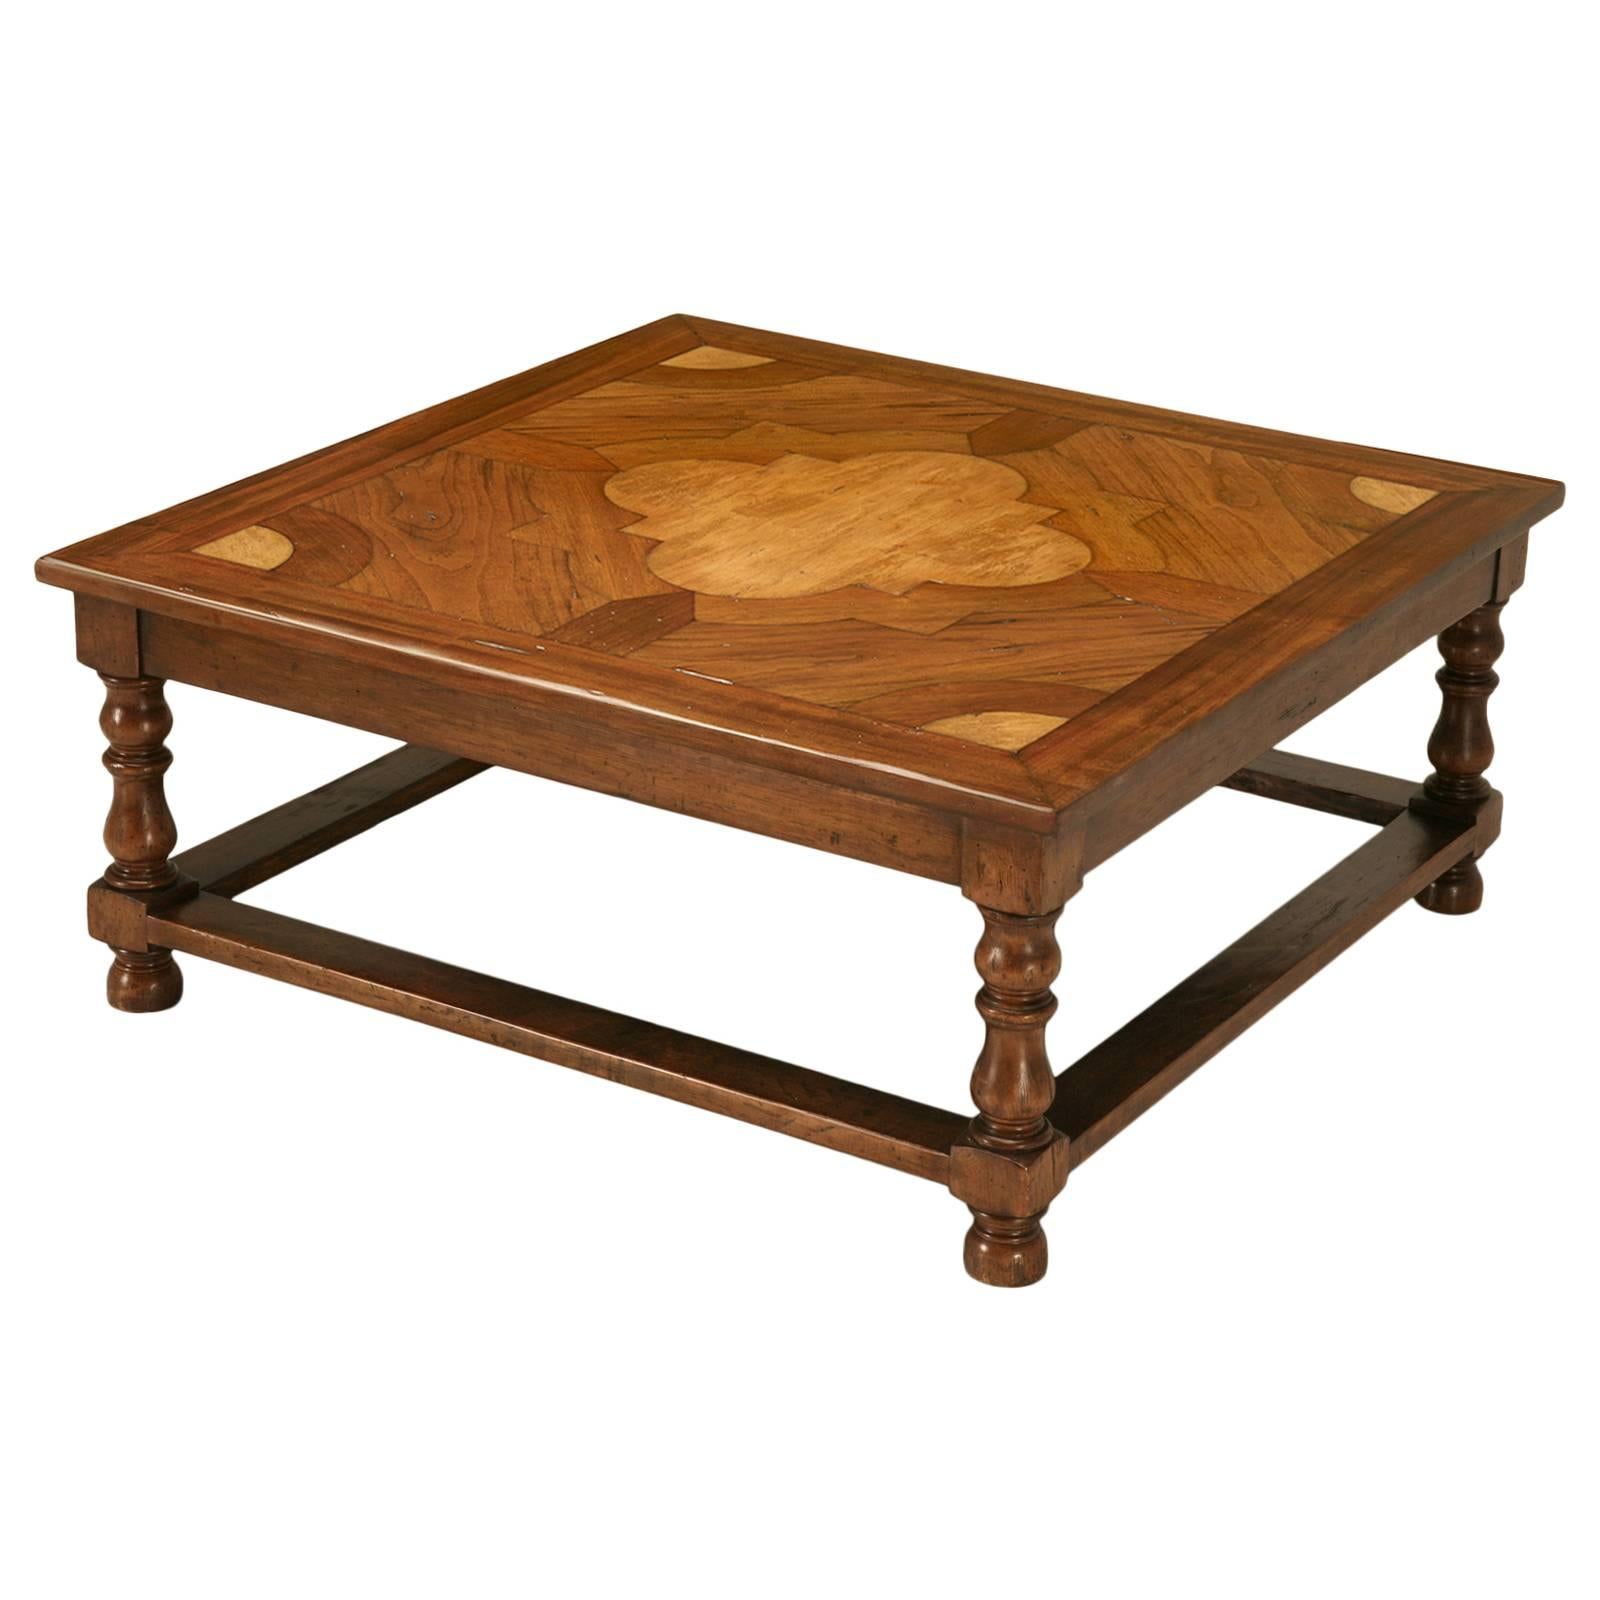 Inlaid French Inspired Square Coffee Table Hand-Crafted by Old Plank in Chicago For Sale